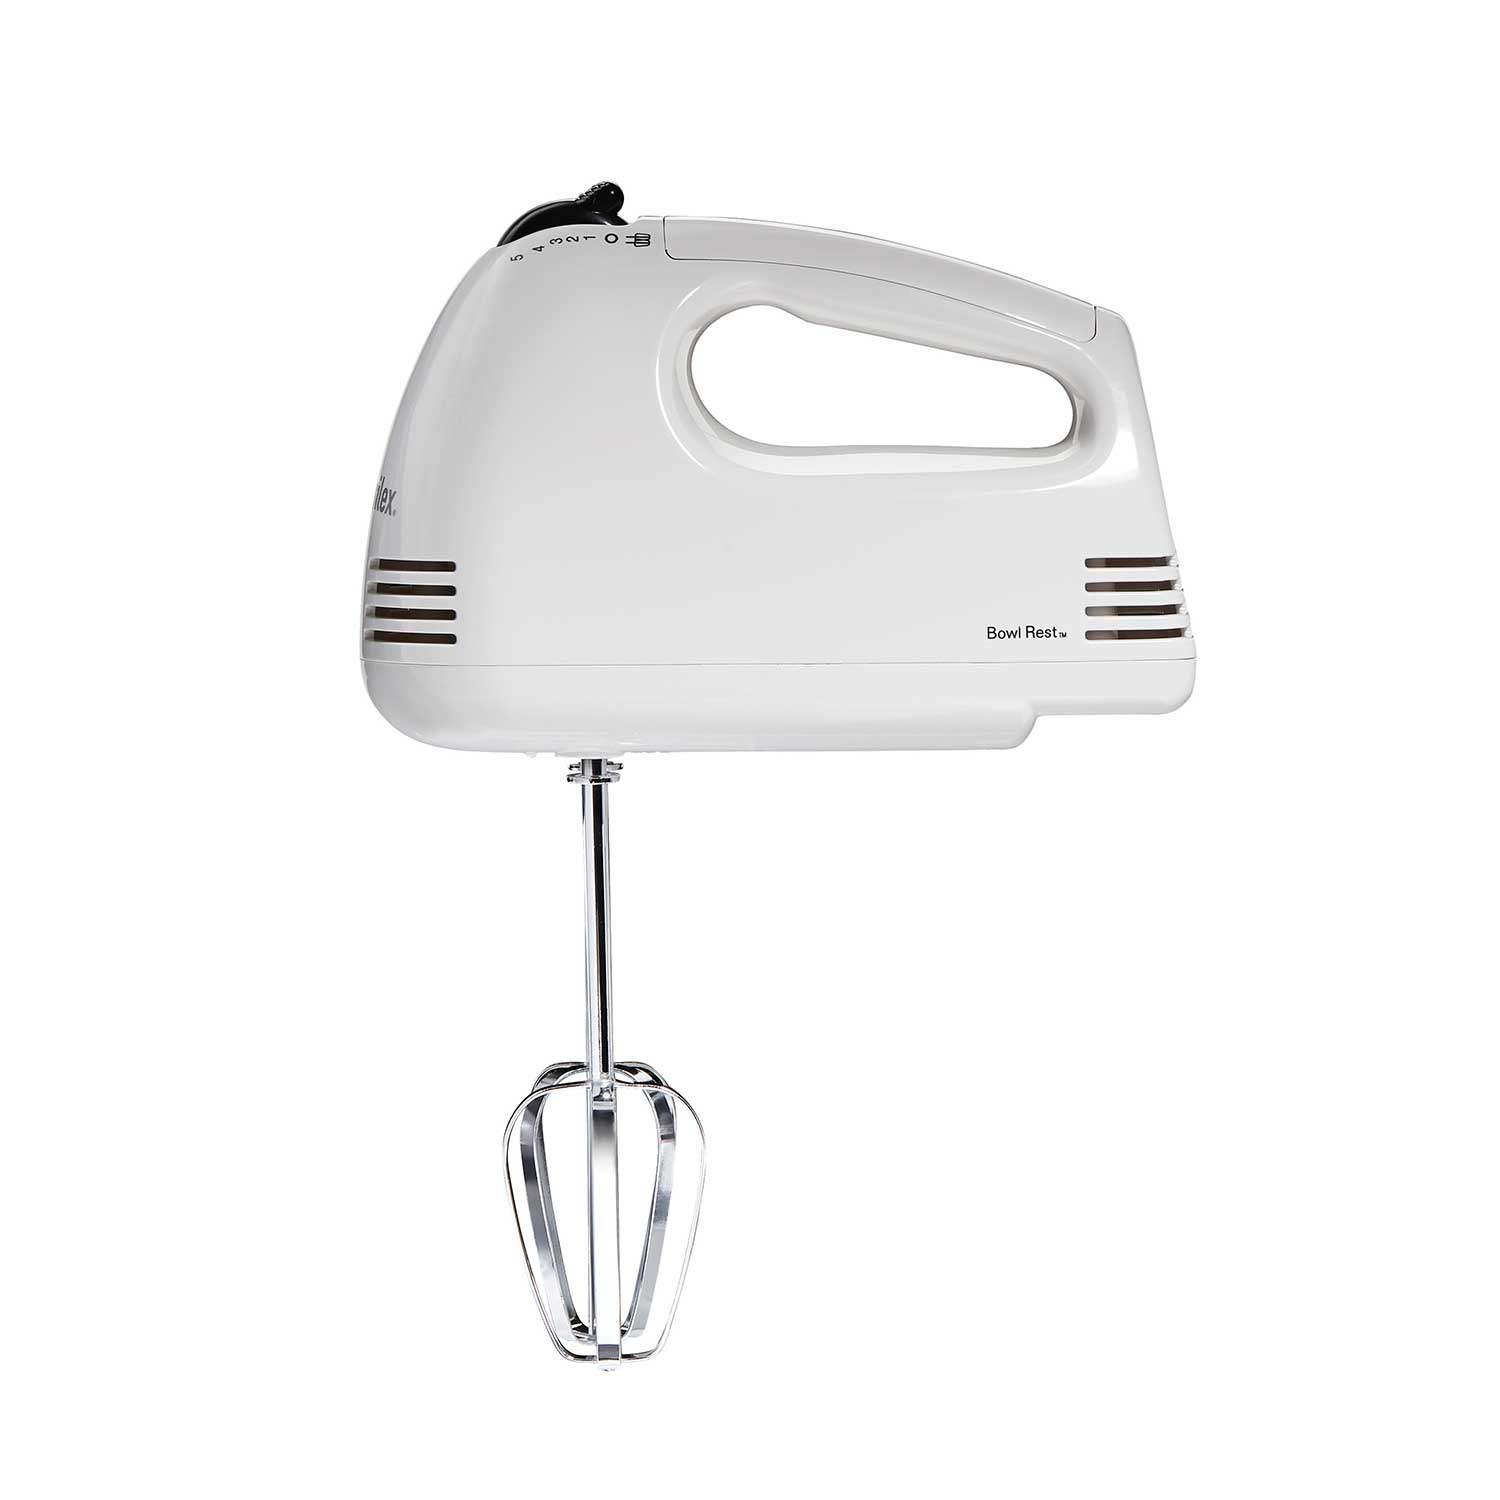 Easy Mix Hand Mixer 5 Speeds (White) - Model 62515PS Small Size